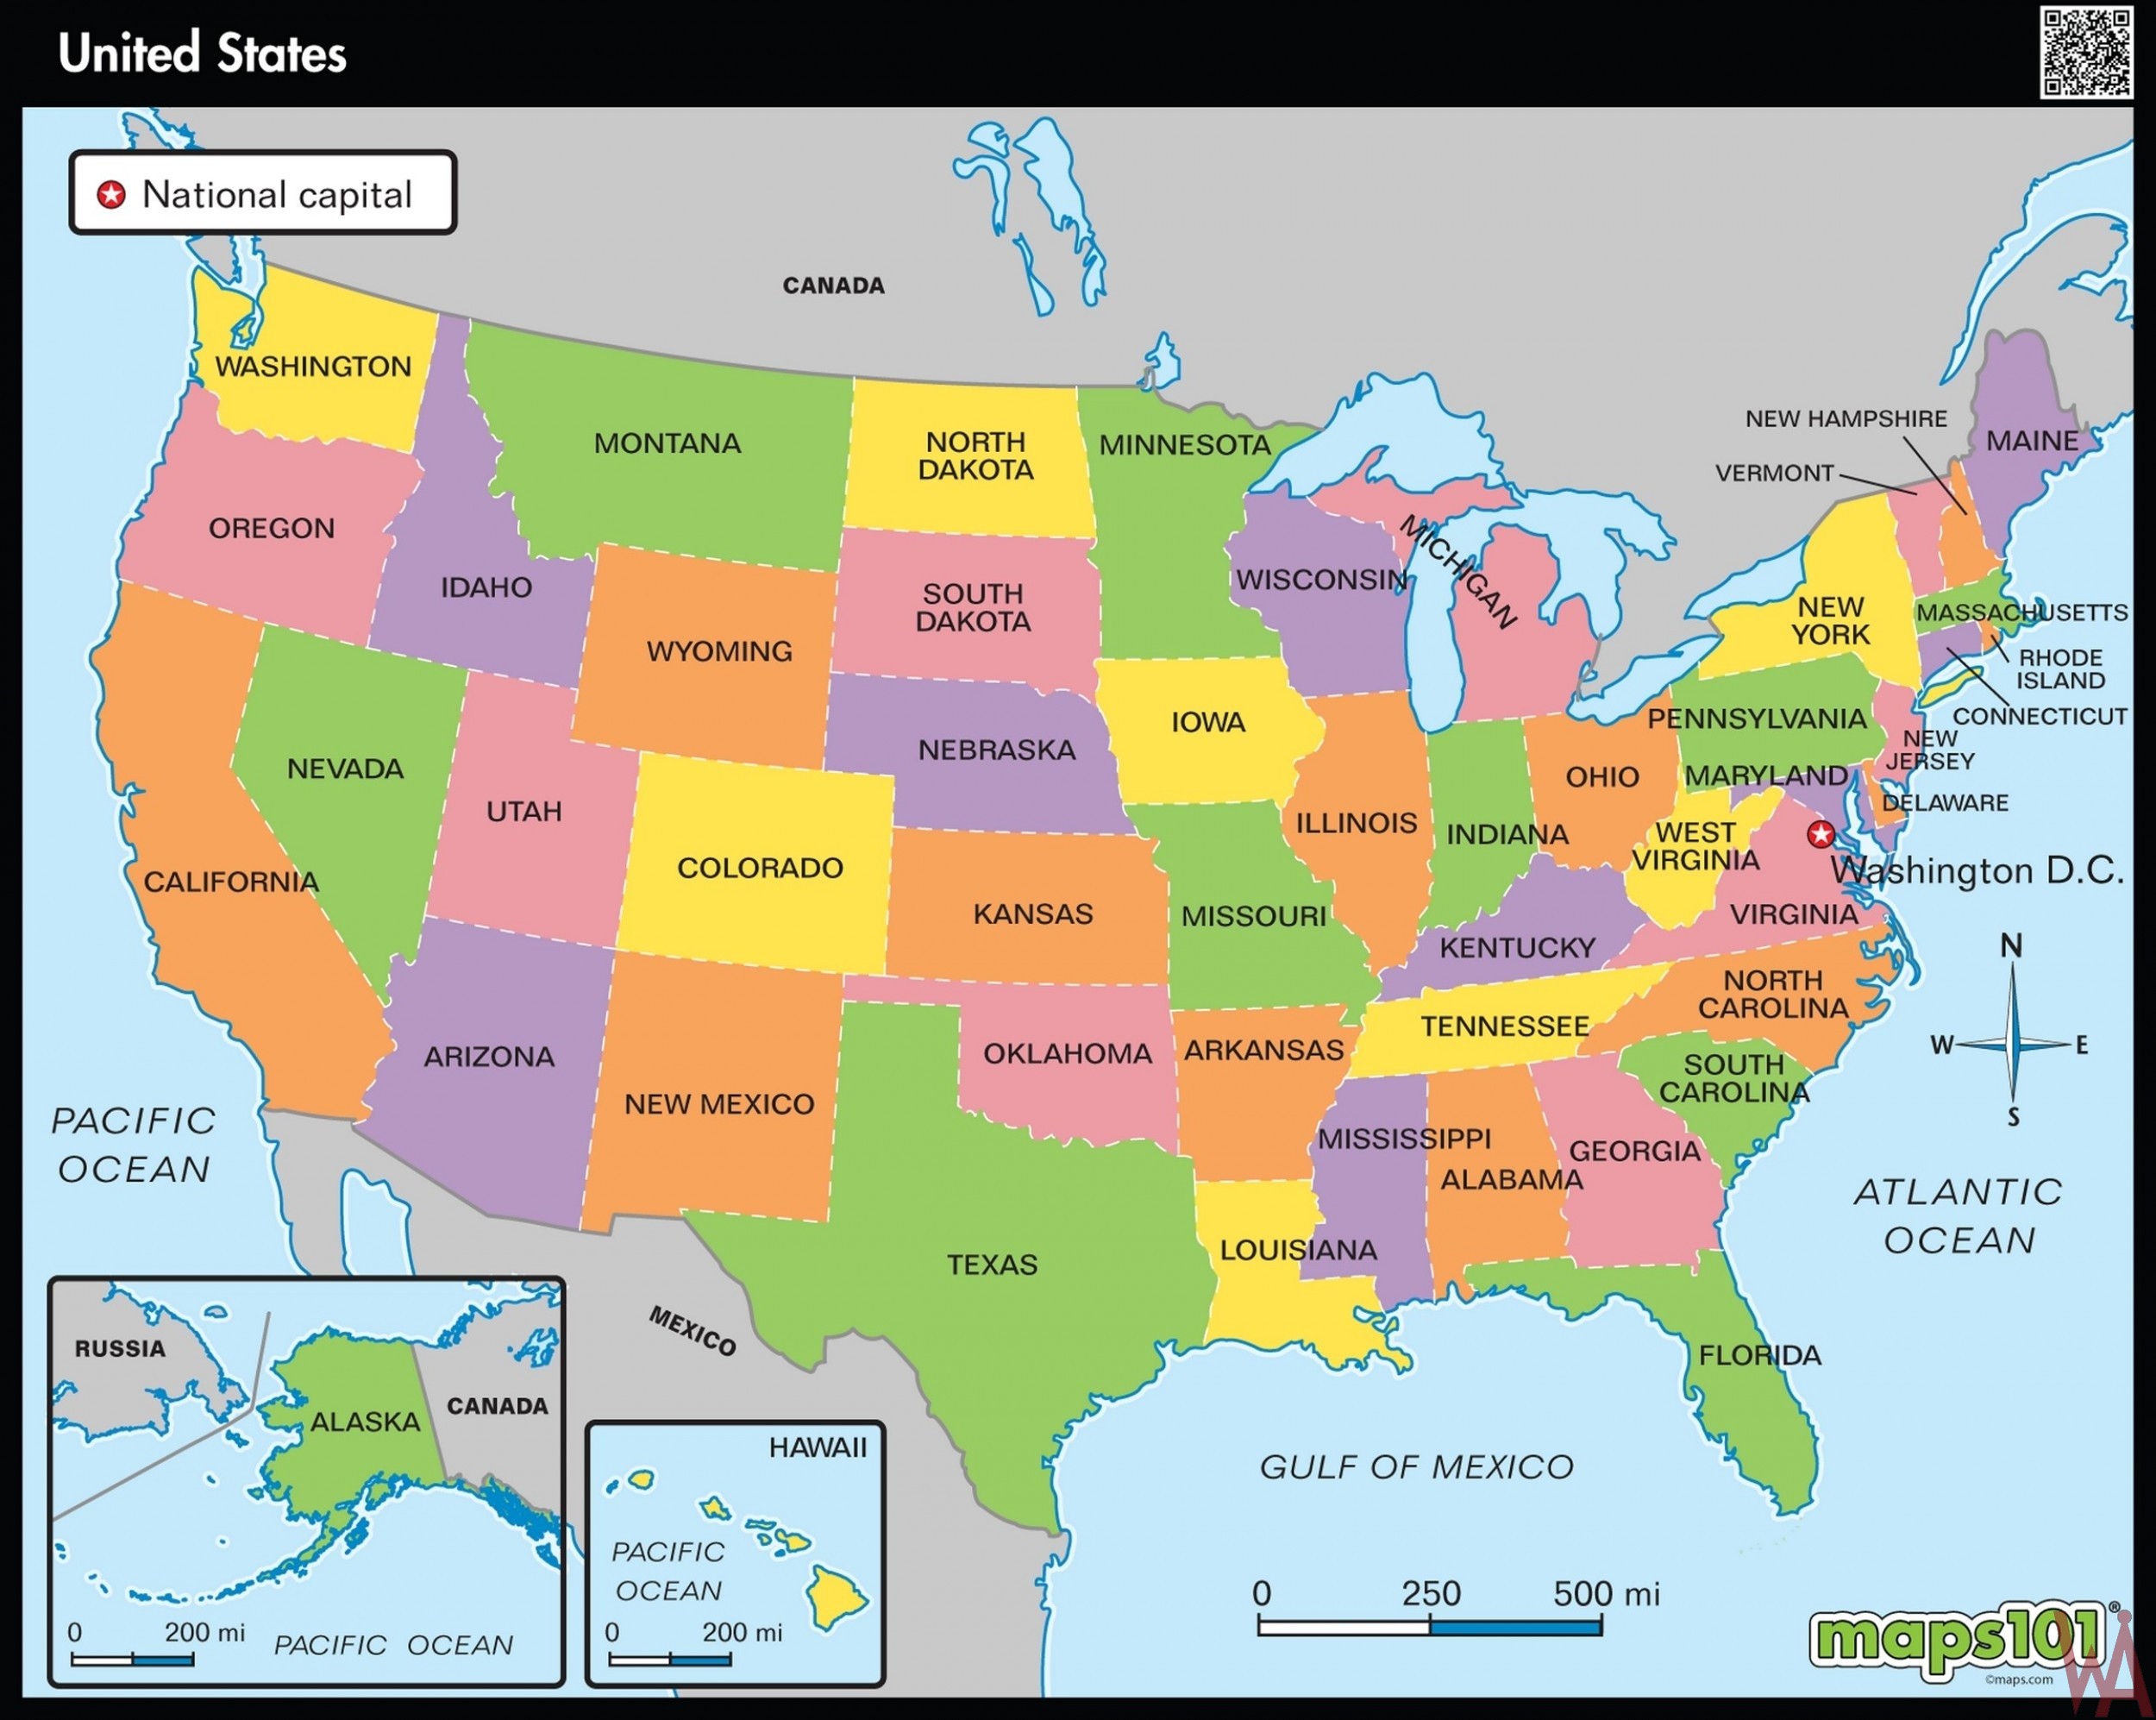 Hd Wallpaper Large State Map Of The Us - United States Political Maps - HD Wallpaper 